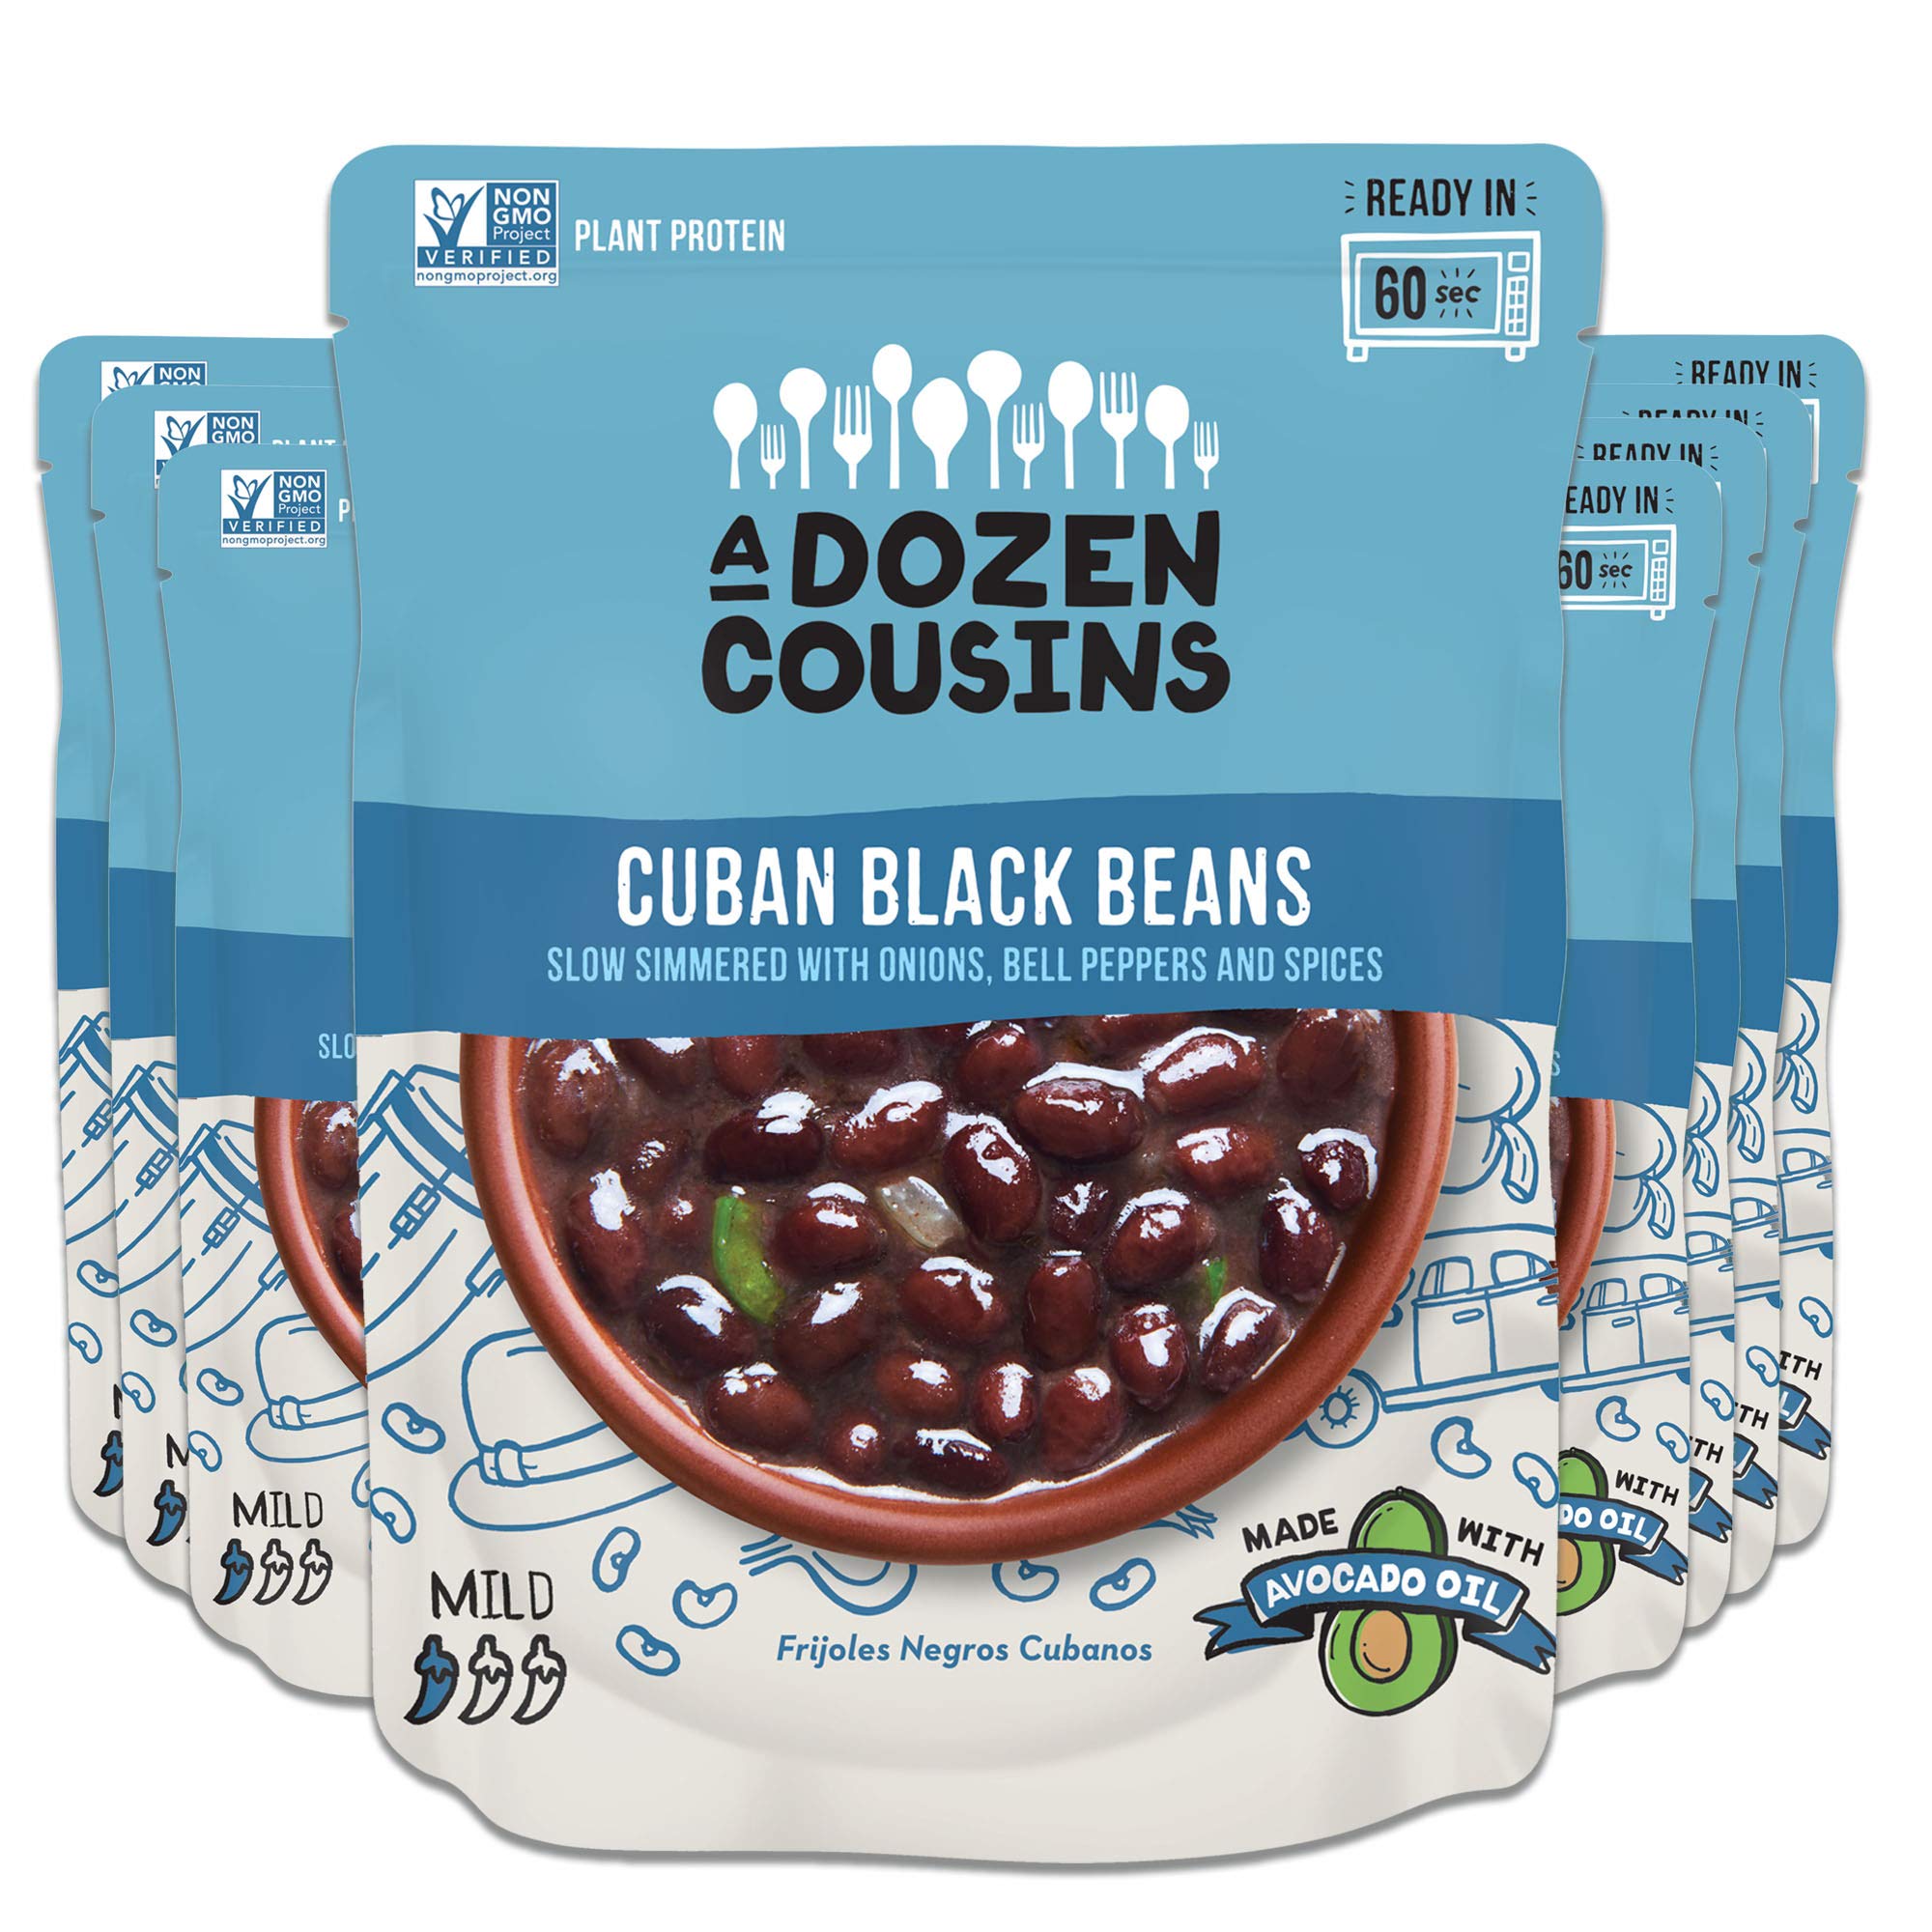 A Dozen Cousins Seasoned Black Beans, Vegan and Non-GMO Meals Ready to Eat Made with Avocado Oil (Cuban Black Beans, 8-Pack)